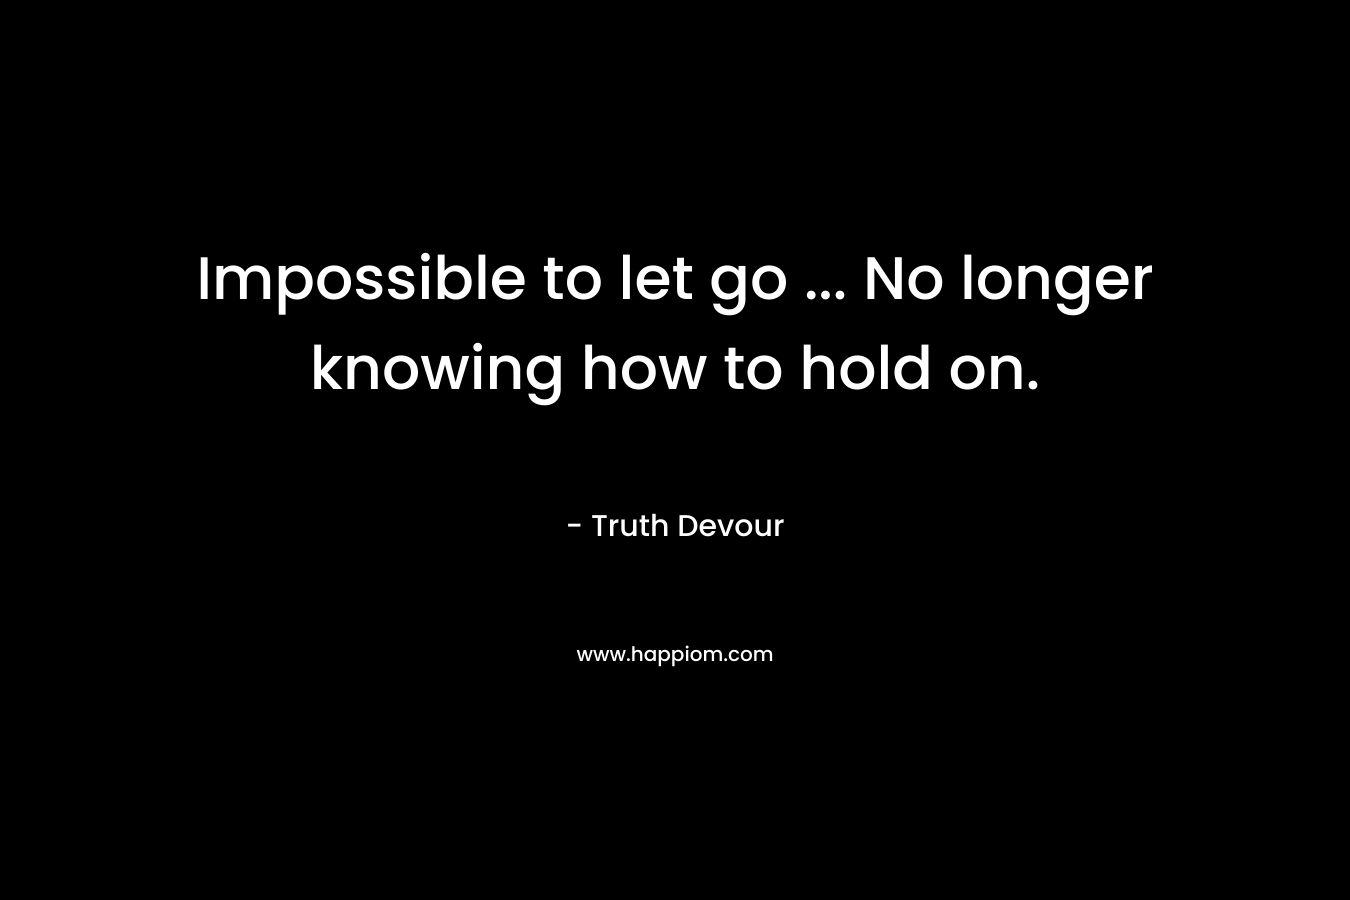 Impossible to let go ... No longer knowing how to hold on.